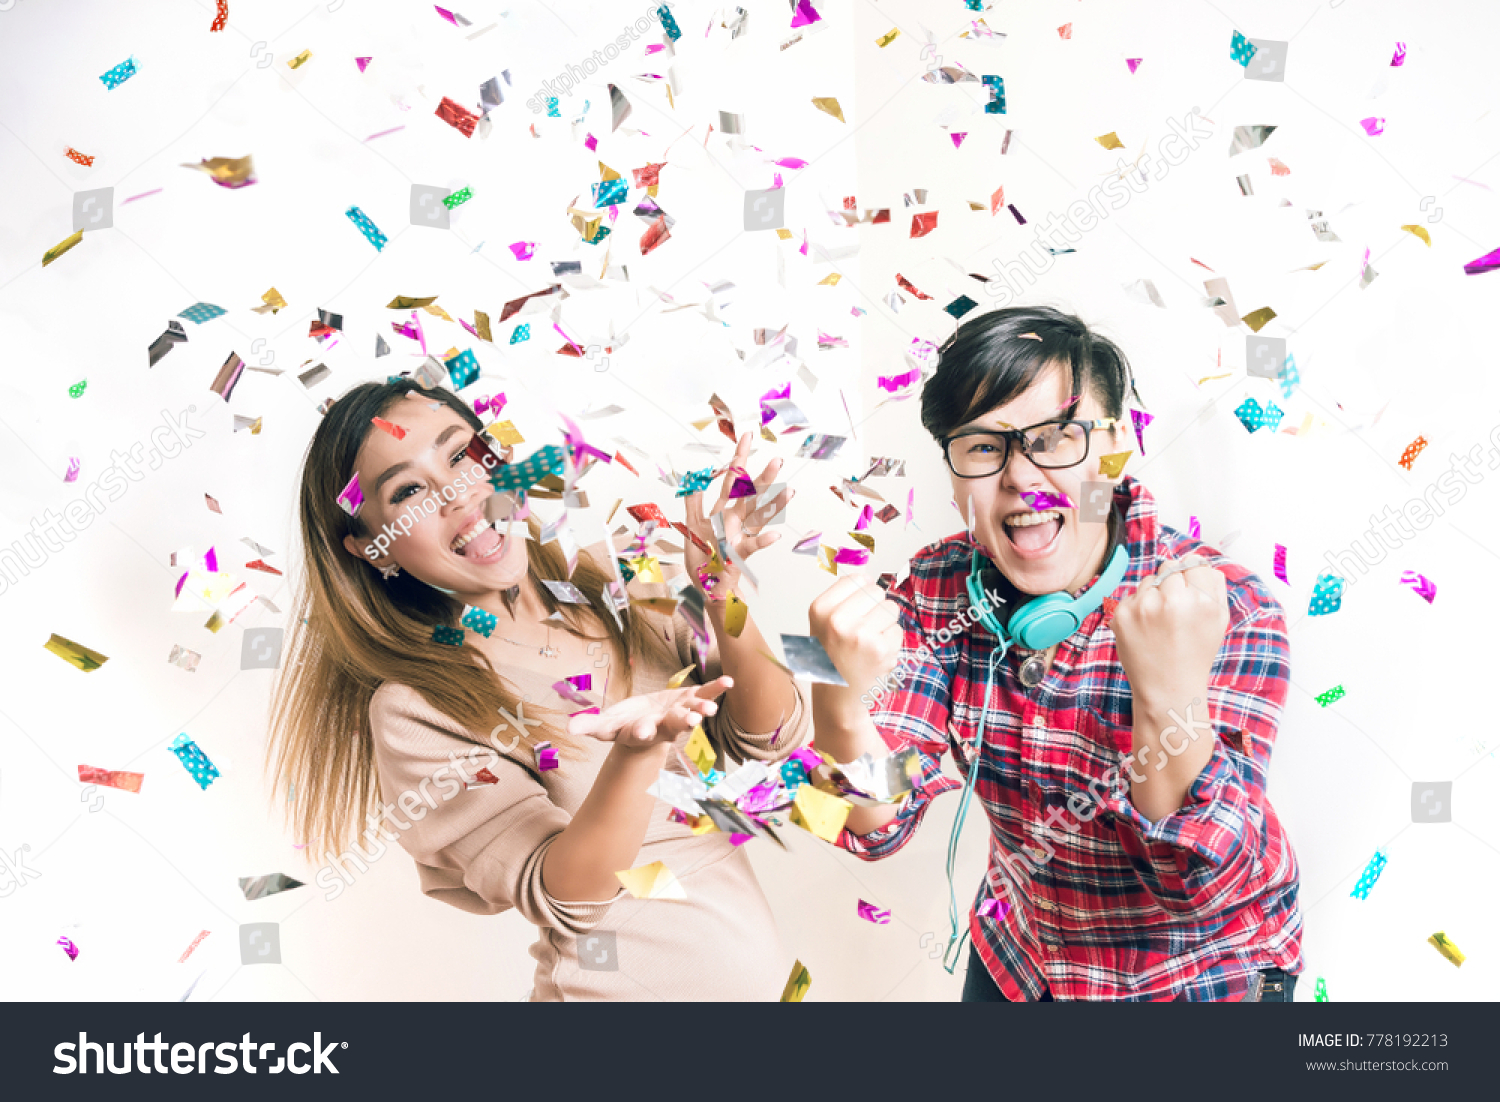 Party People - Surprise Birthday Party Celebrate having Fun and Enjoy with Colorful Confetti and Dancing with Friends or Event Christmas , New Year - Happy Emotion #778192213